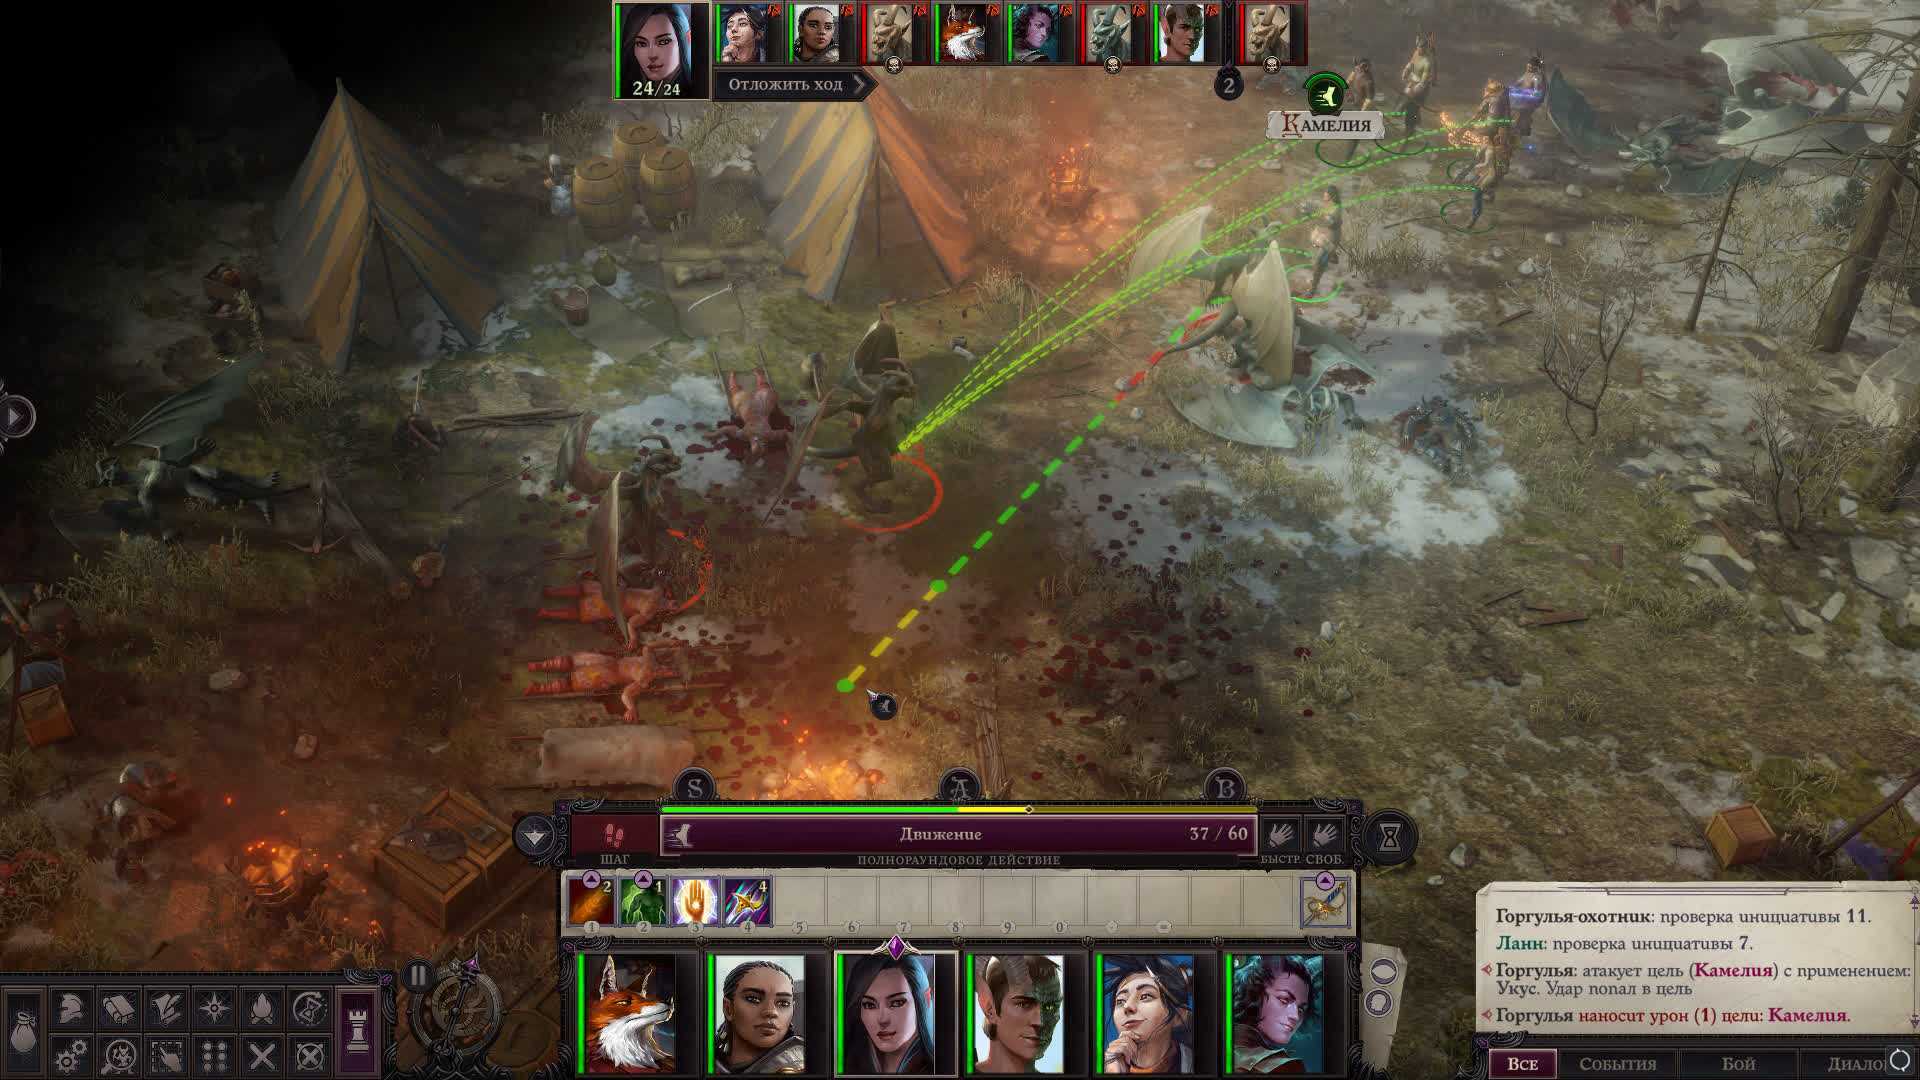 Pathfinder Wrath of the Righteous пошаговые бои. Pathfinder Kingmaker Wrath of the Righteous пик штормов. Pathfinder Wrath of the Righteous Art. Pathfinder Wrath show relationship changes Mod.